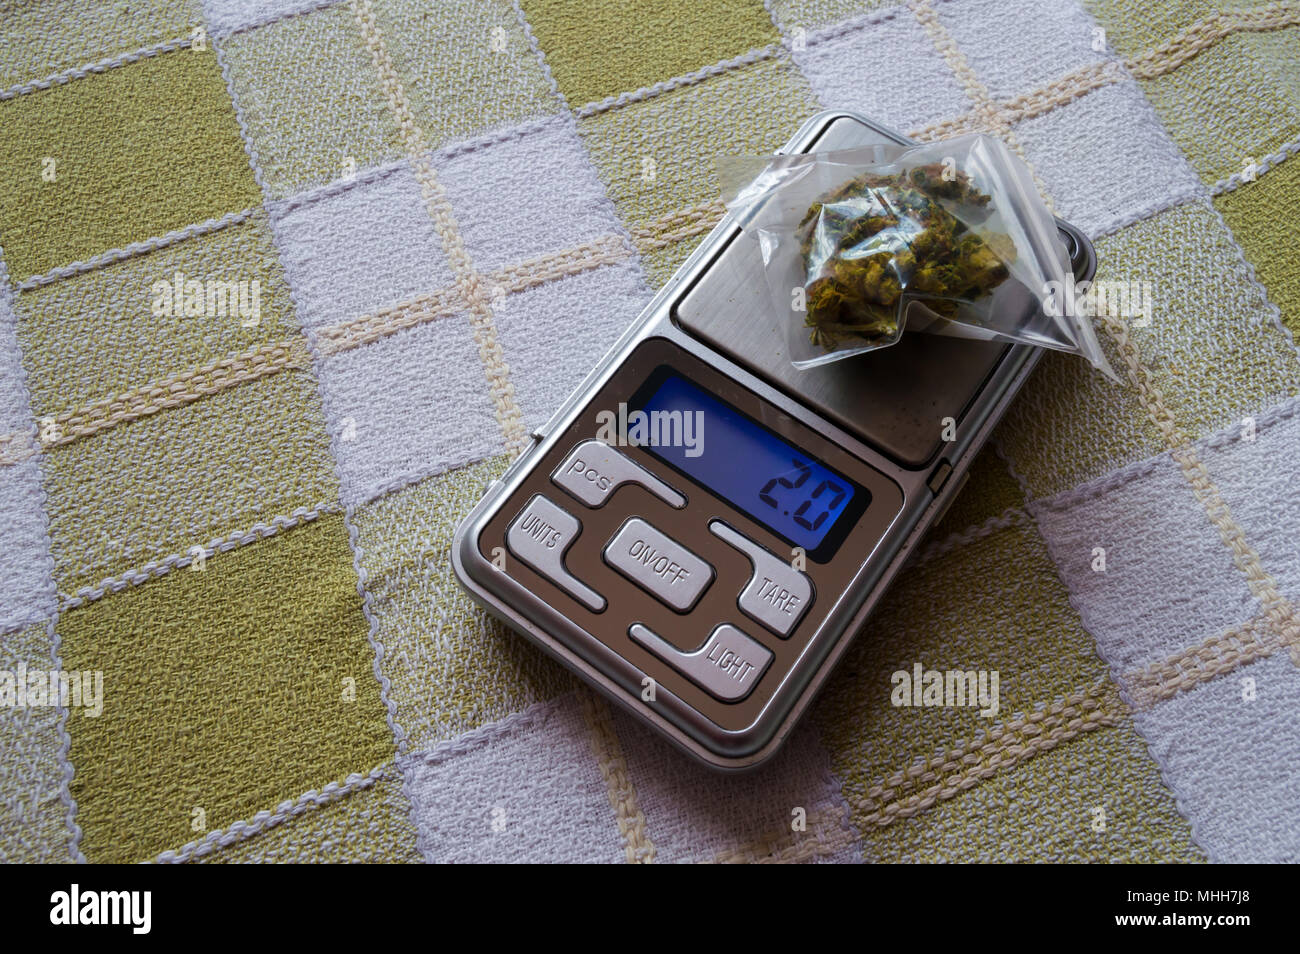 https://c8.alamy.com/comp/MHH7J8/small-digital-weighing-machine-of-precision-with-a-plastic-bag-with-two-grams-of-marijuana-buds-concept-of-selling-drugs-weighing-or-package-MHH7J8.jpg